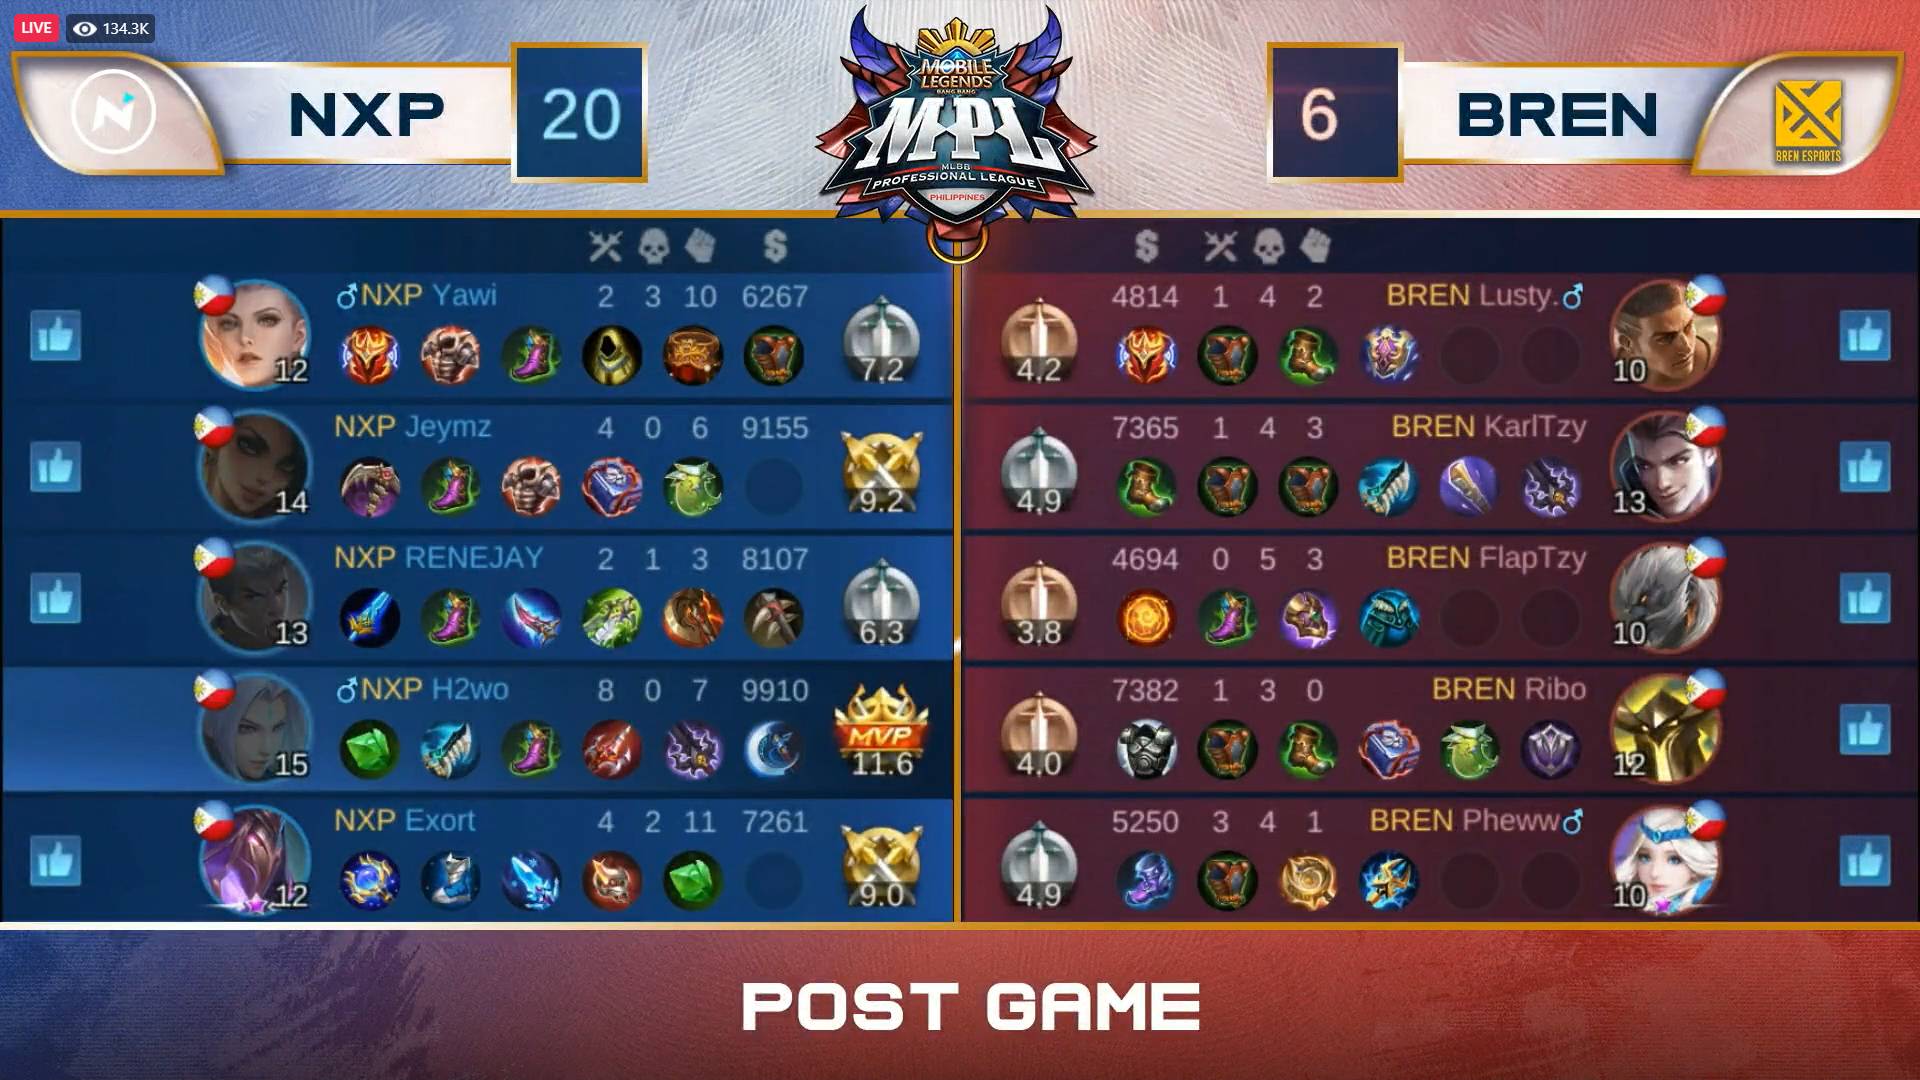 MPL-PH-7-NXP-def-Bren-Game-2 Nexplay drops world champ BREN to 0-2 in MPL-PH after surprise sweep ESports Mobile Legends MPL-PH News  - philippine sports news